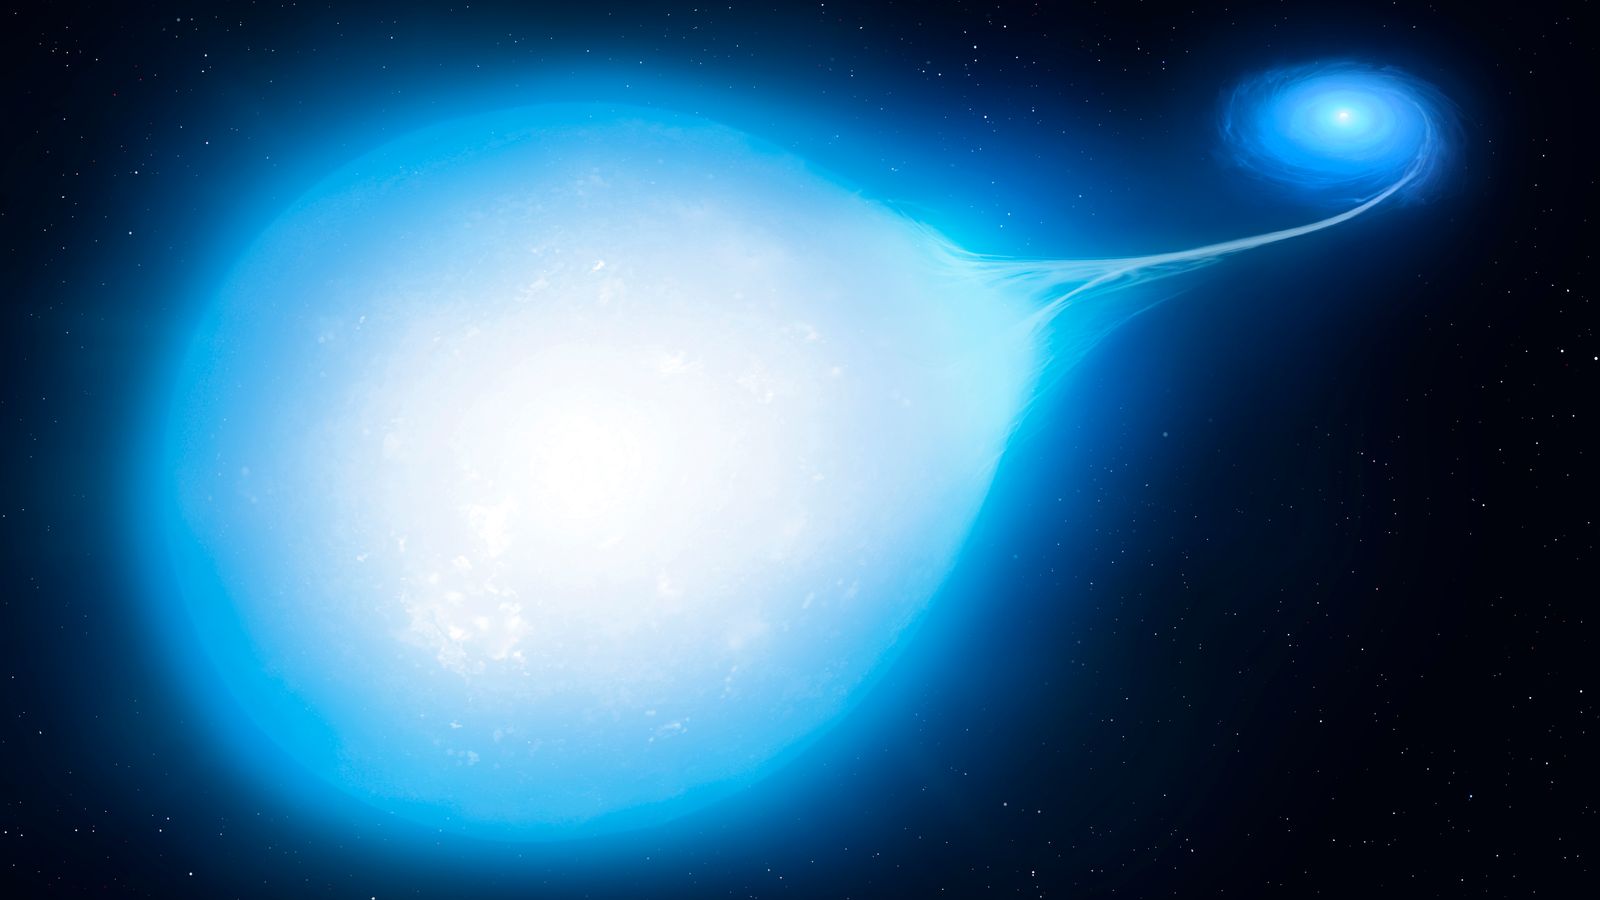 Astronomers discover teardrop-shaped star they predict will explode in supernova